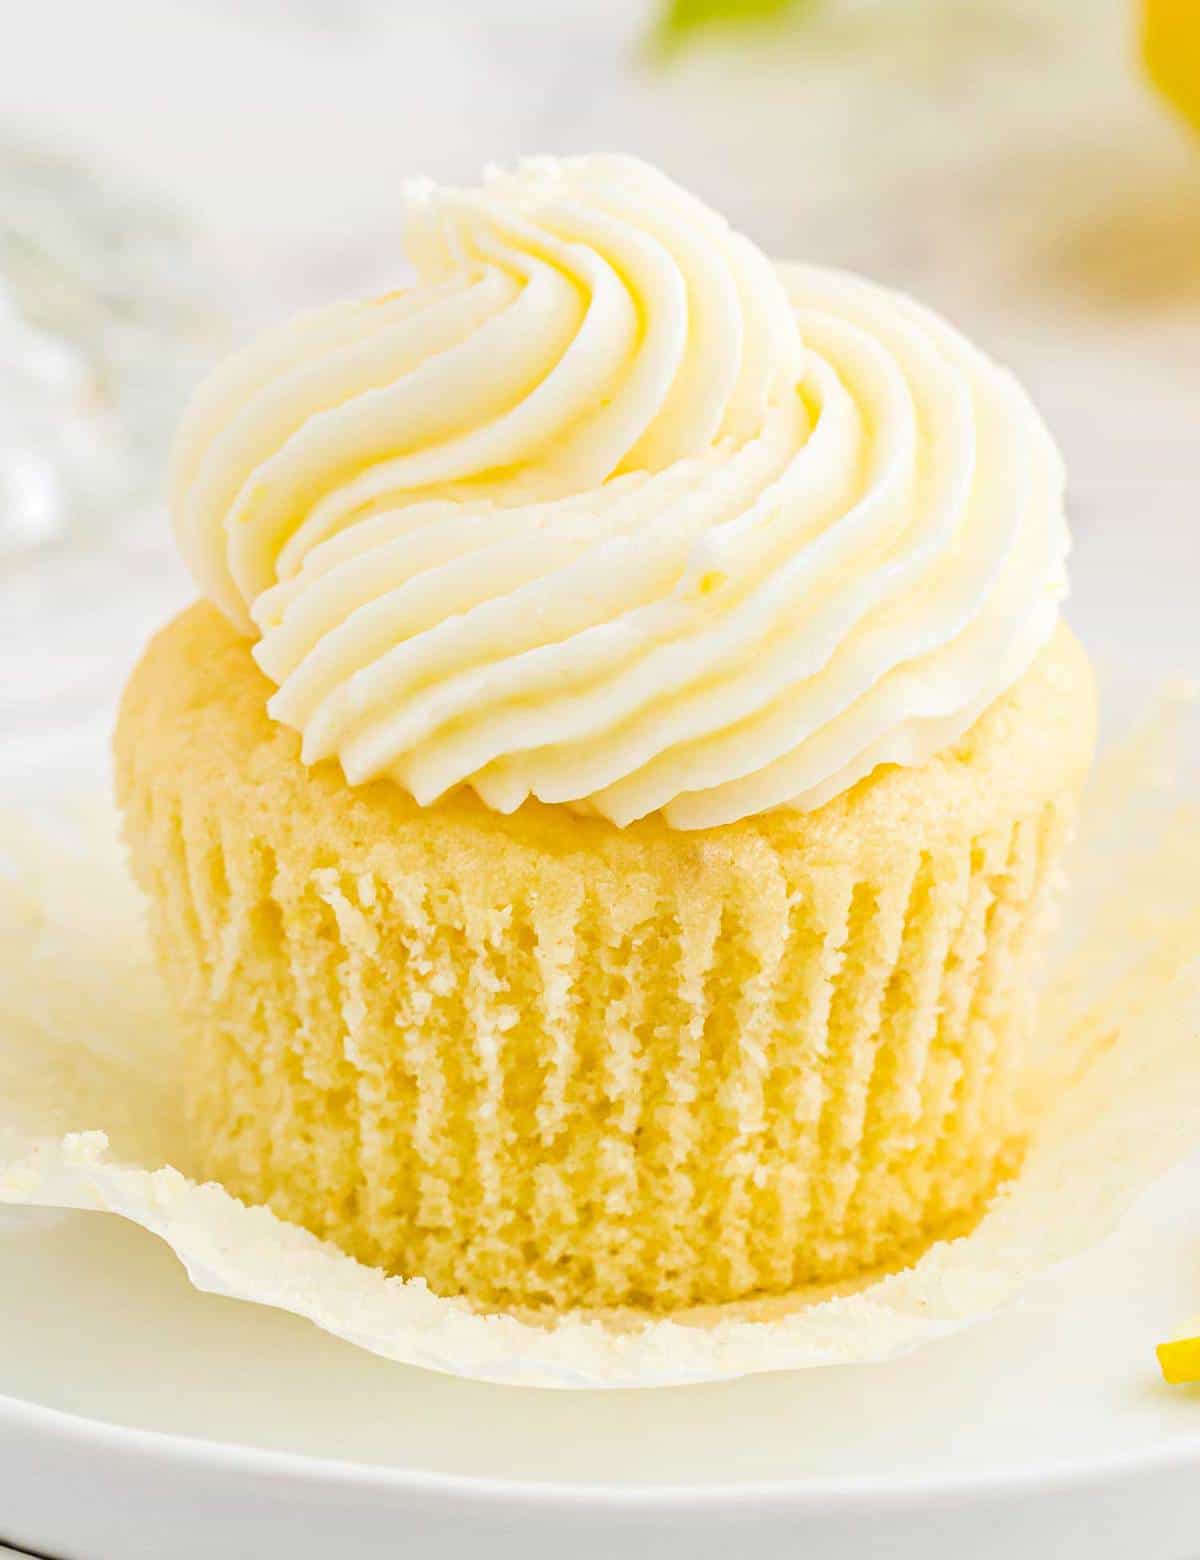 Lemon Cupcakes (from scratch) - The Chunky Chef